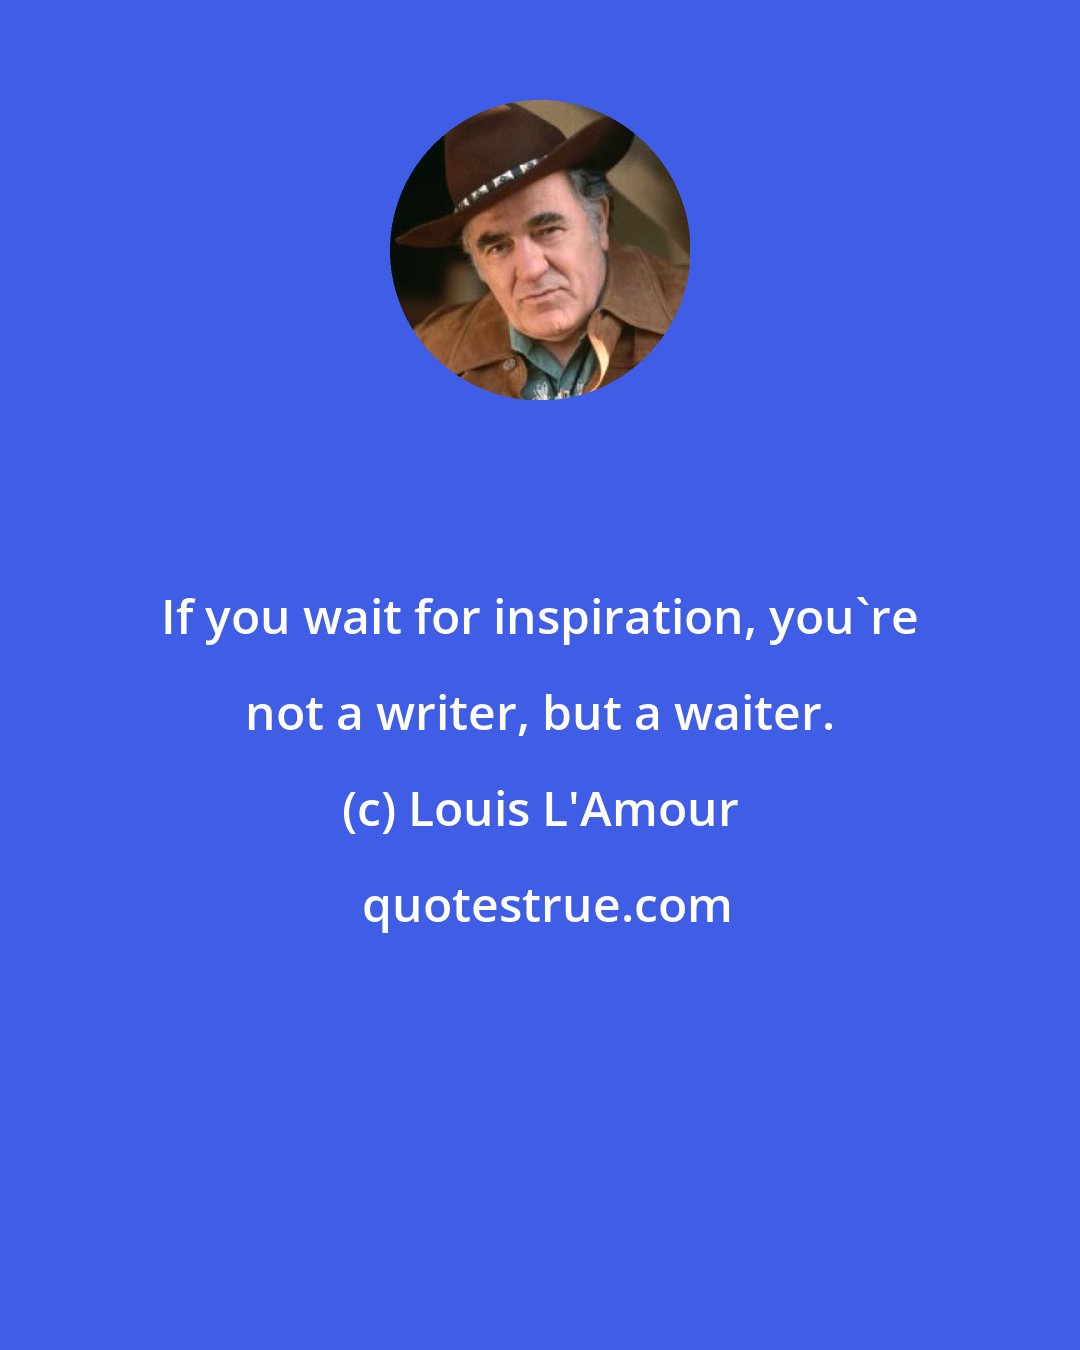 Louis L'Amour: If you wait for inspiration, you're not a writer, but a waiter.